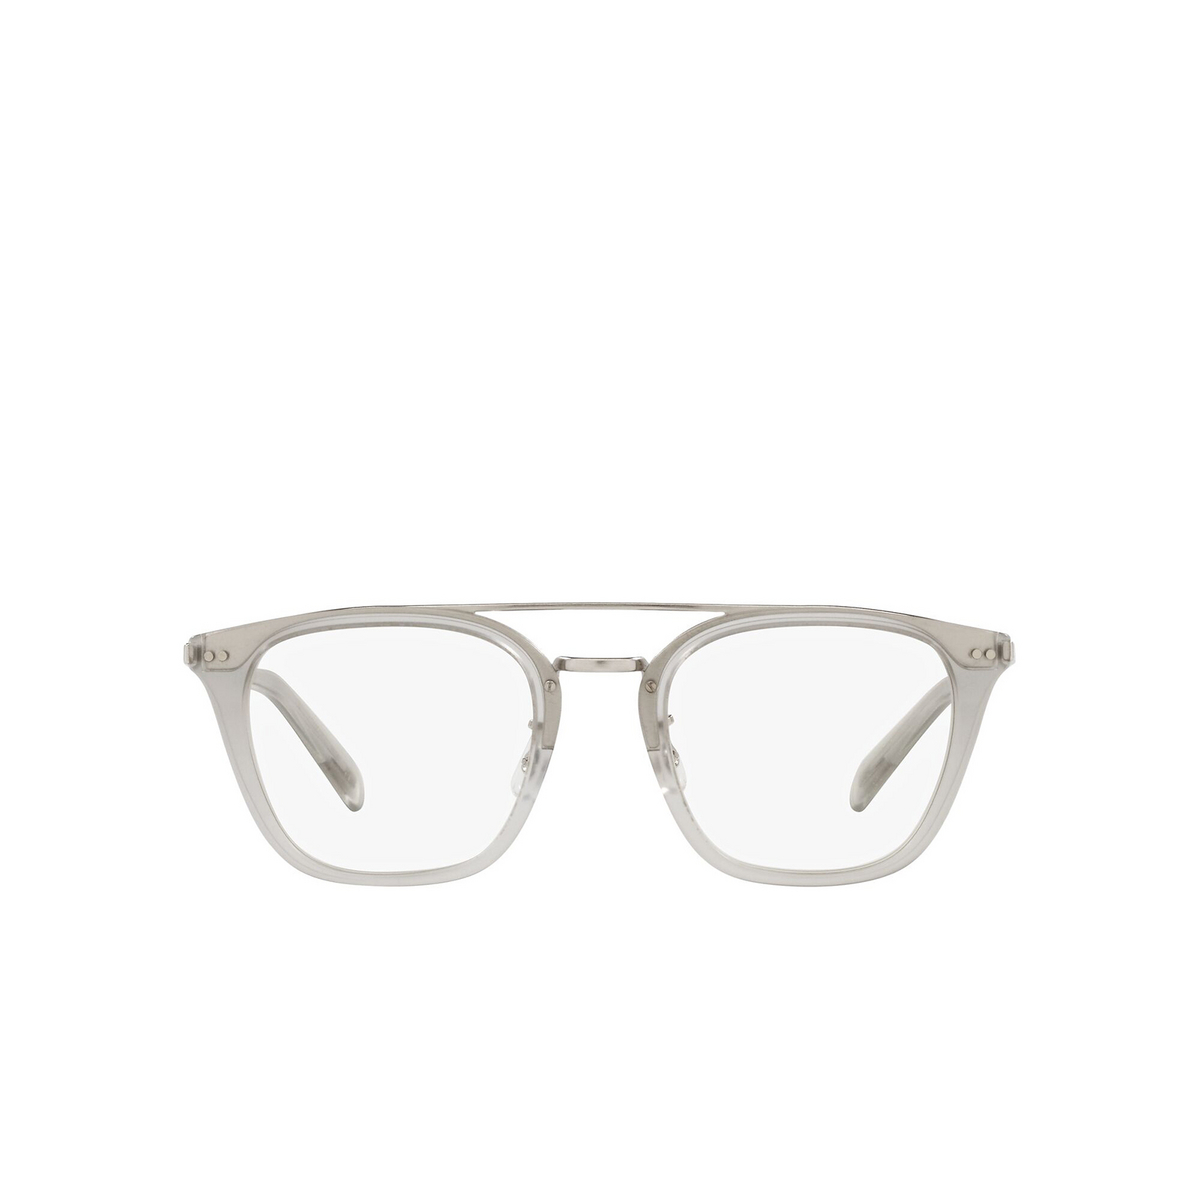 Oliver Peoples® Rectangle Sunglasses: Frère La OV5461SU color Brushed Chrome 1669SB - front view.